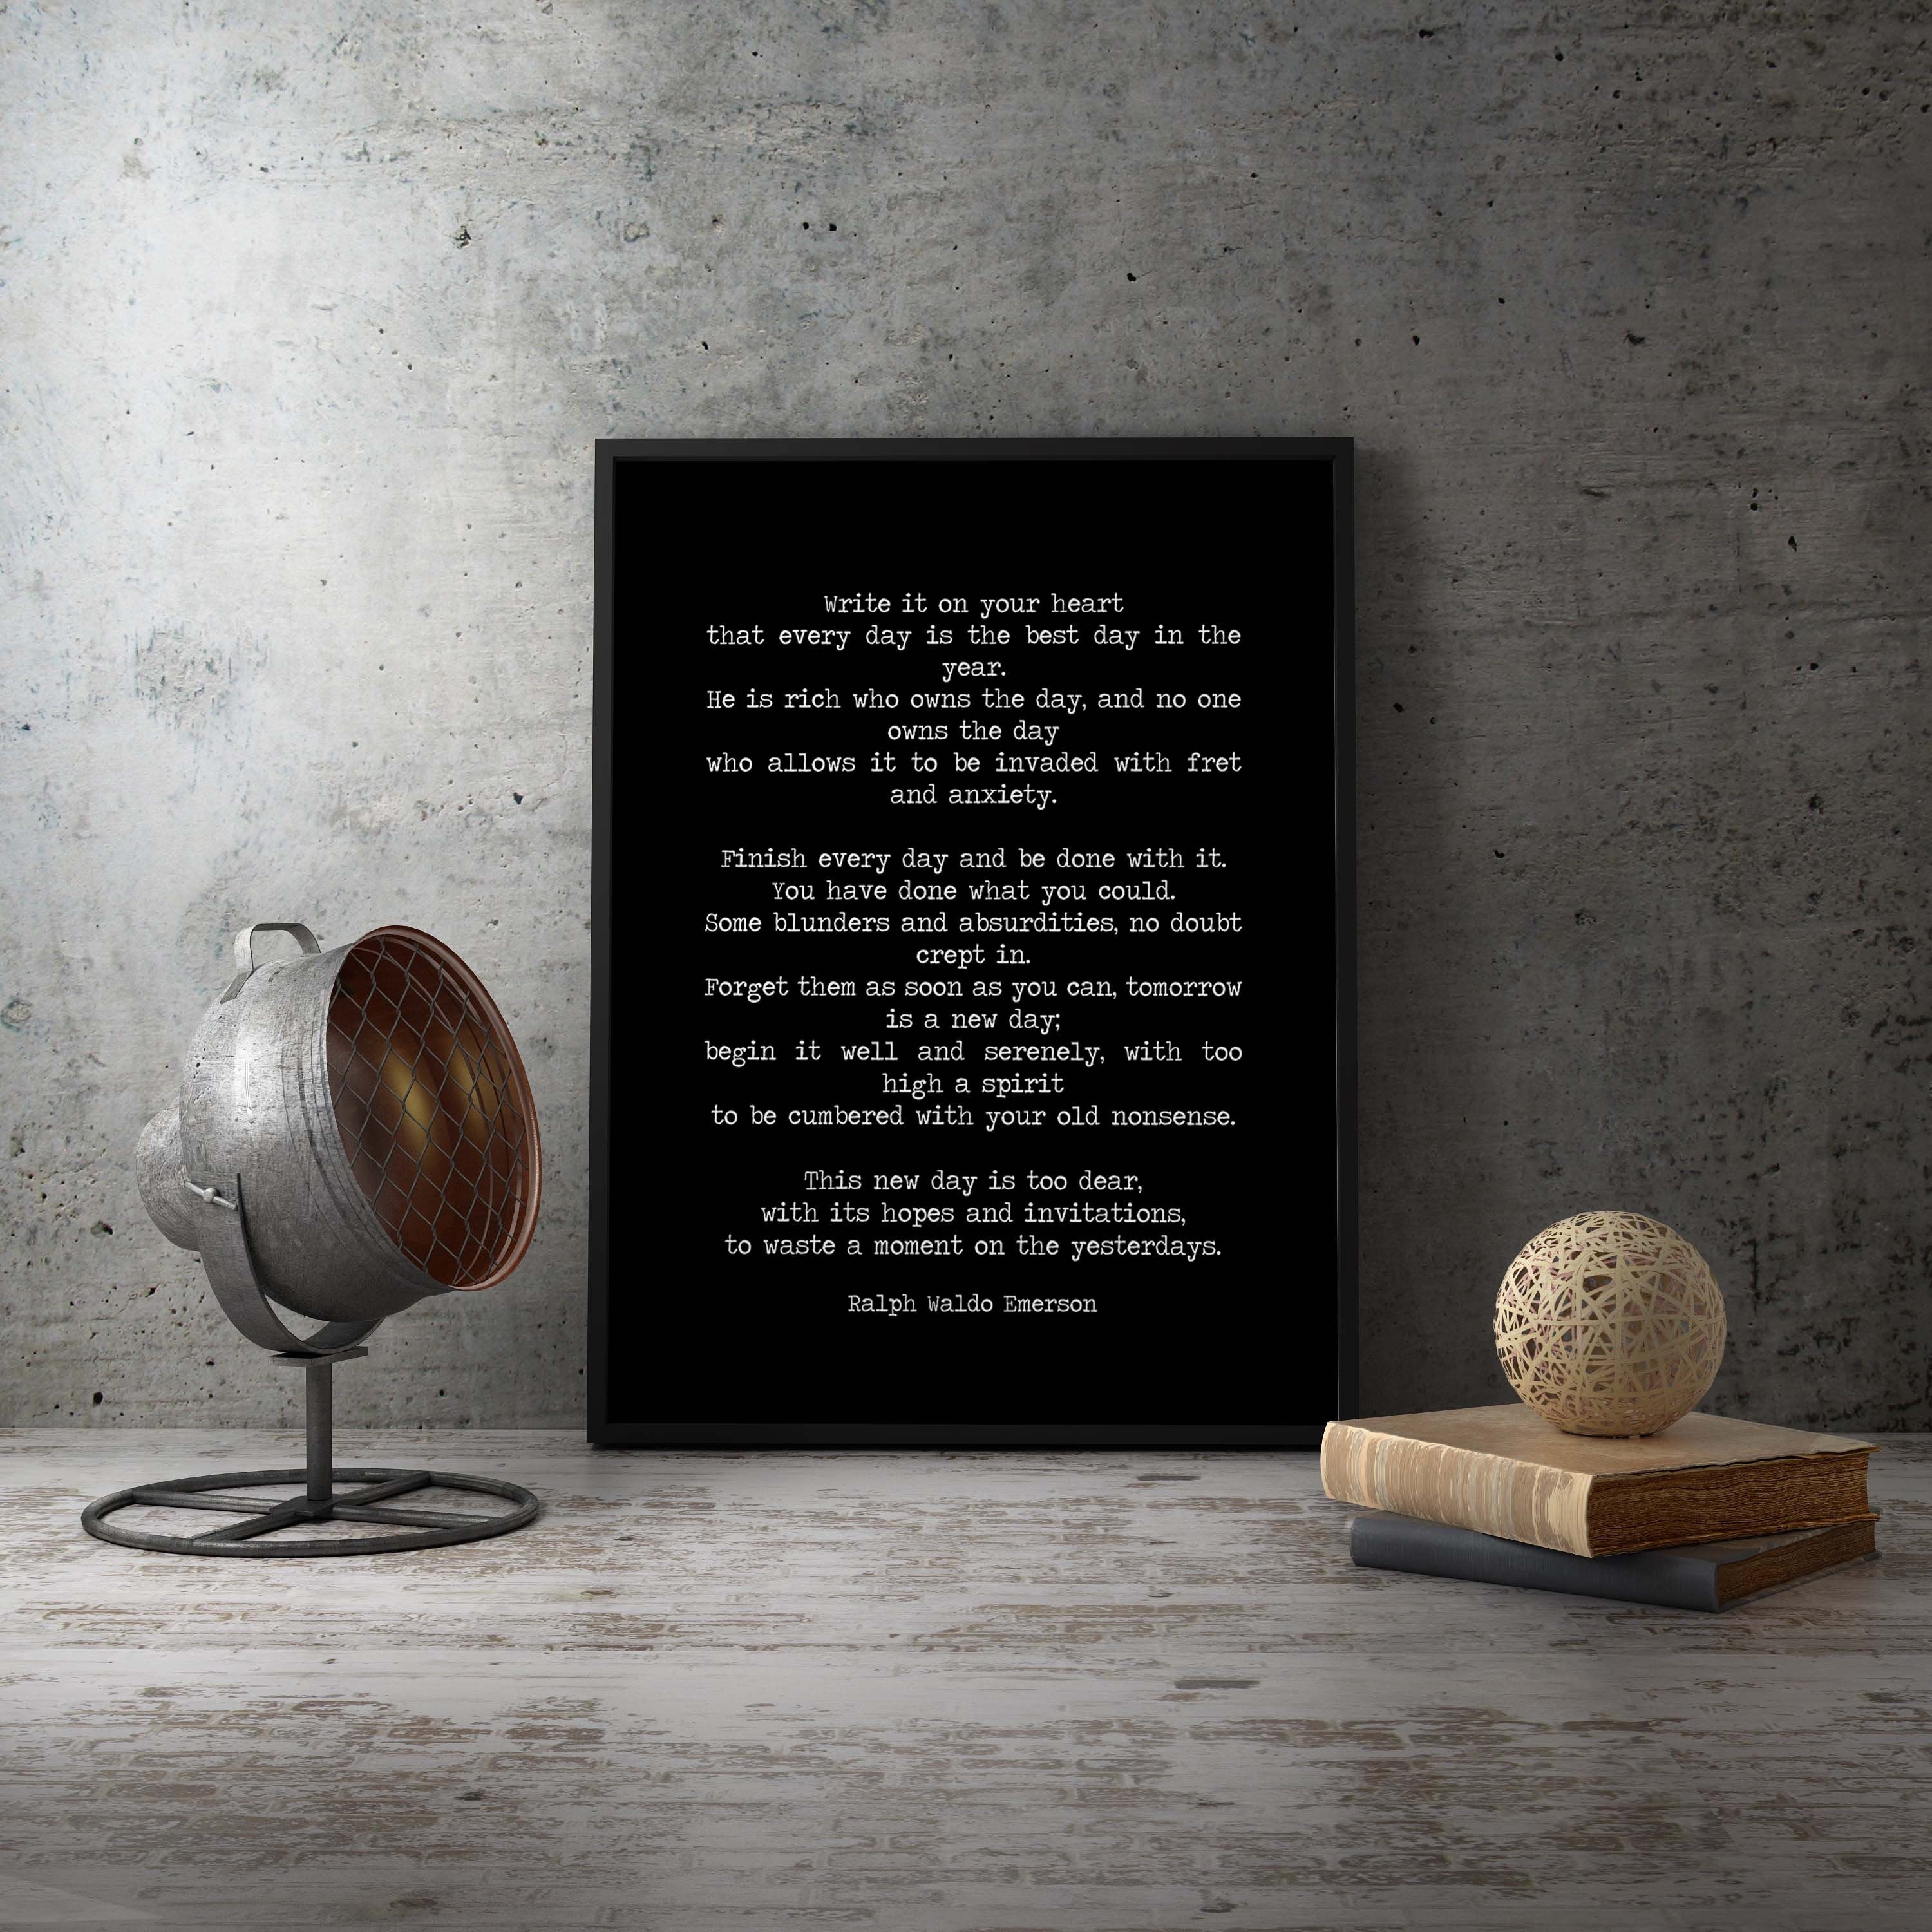 FRAMED Ralph Waldo Emerson Quote Print, He Is Rich Who Owns The Day Black & White Inspirational Print For Home Decor 8x10 - 24x36 framed